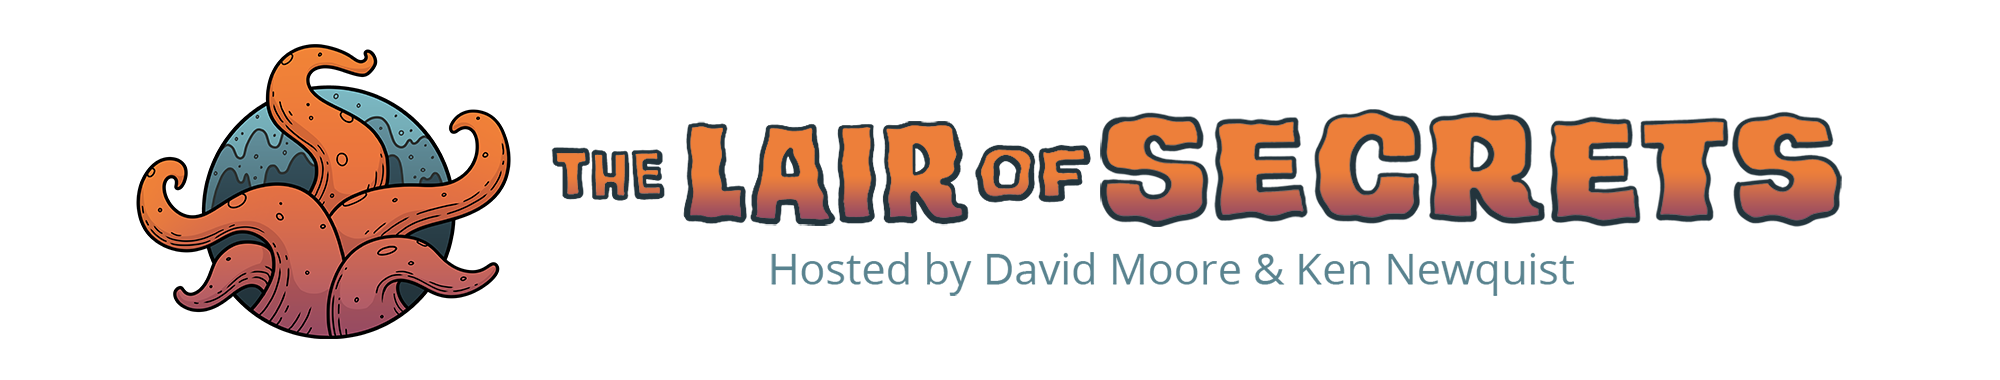 The Lair of Secrets, hosted by David Moore and Ken Newquist